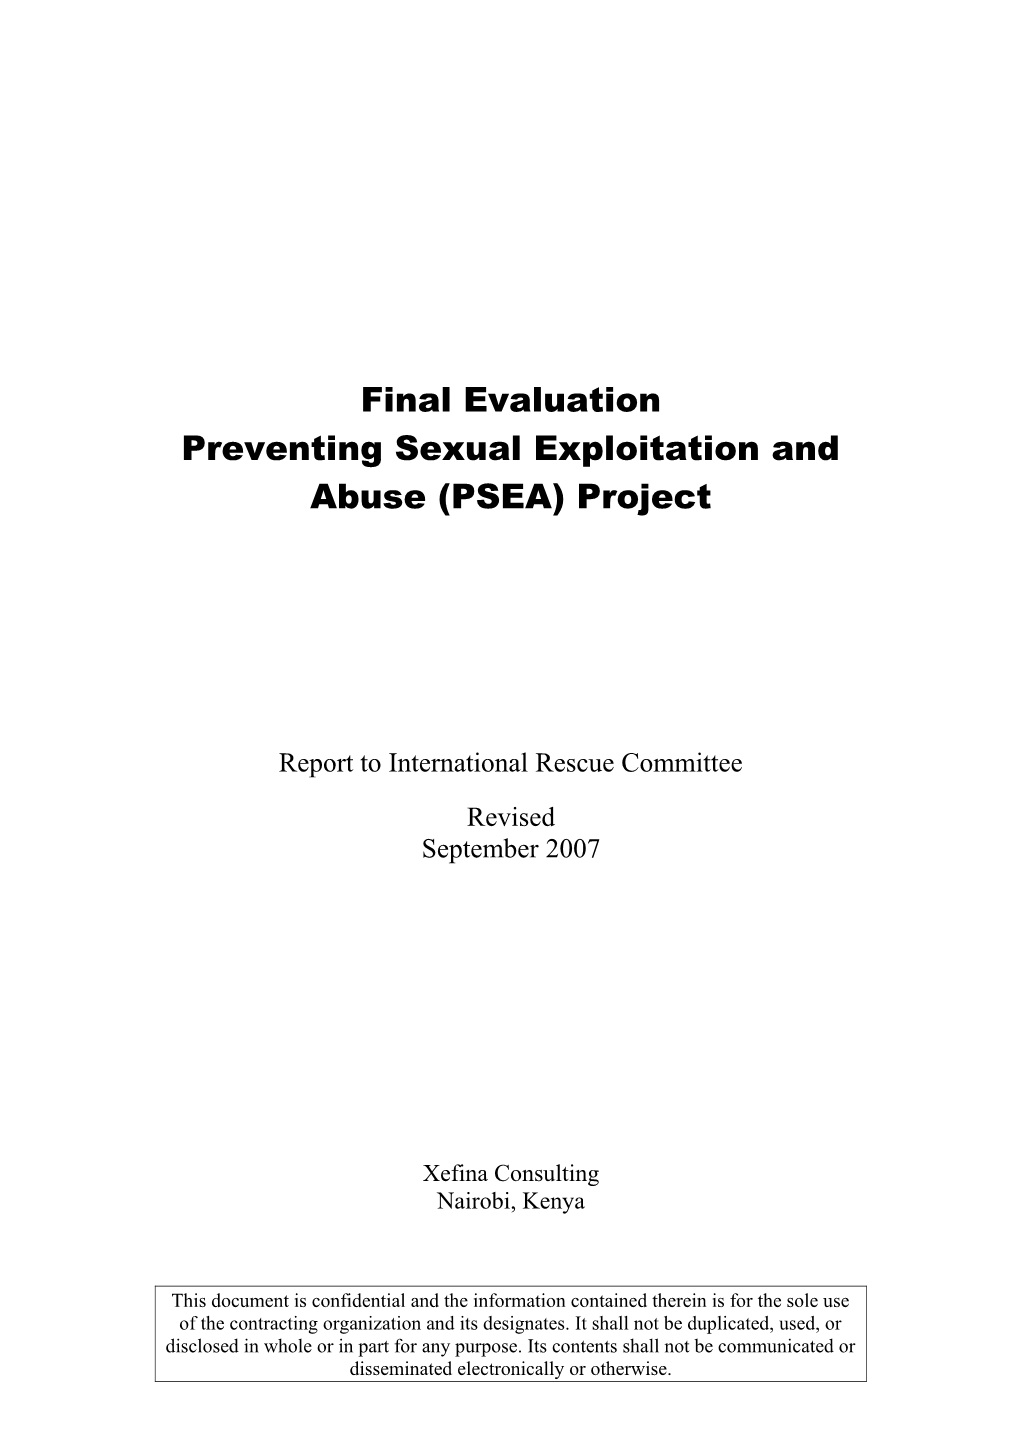 Preventing Sexual Exploitation and Abuse (PSEA) Project